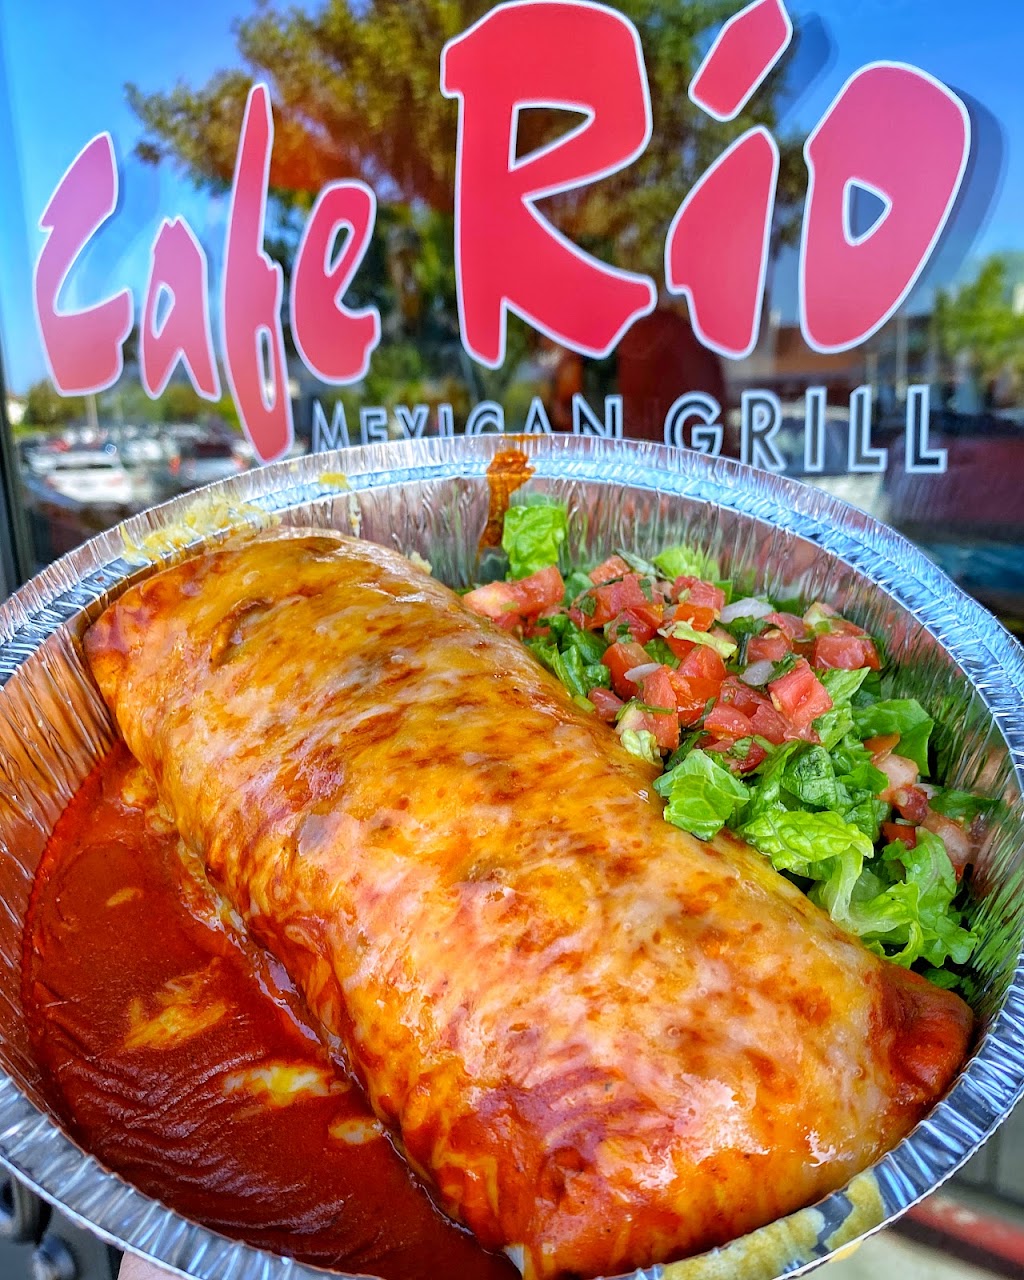 Cafe Rio Mexican Grill | 10895 Foothill Blvd, Rancho Cucamonga, CA 91730 | Phone: (909) 748-5203